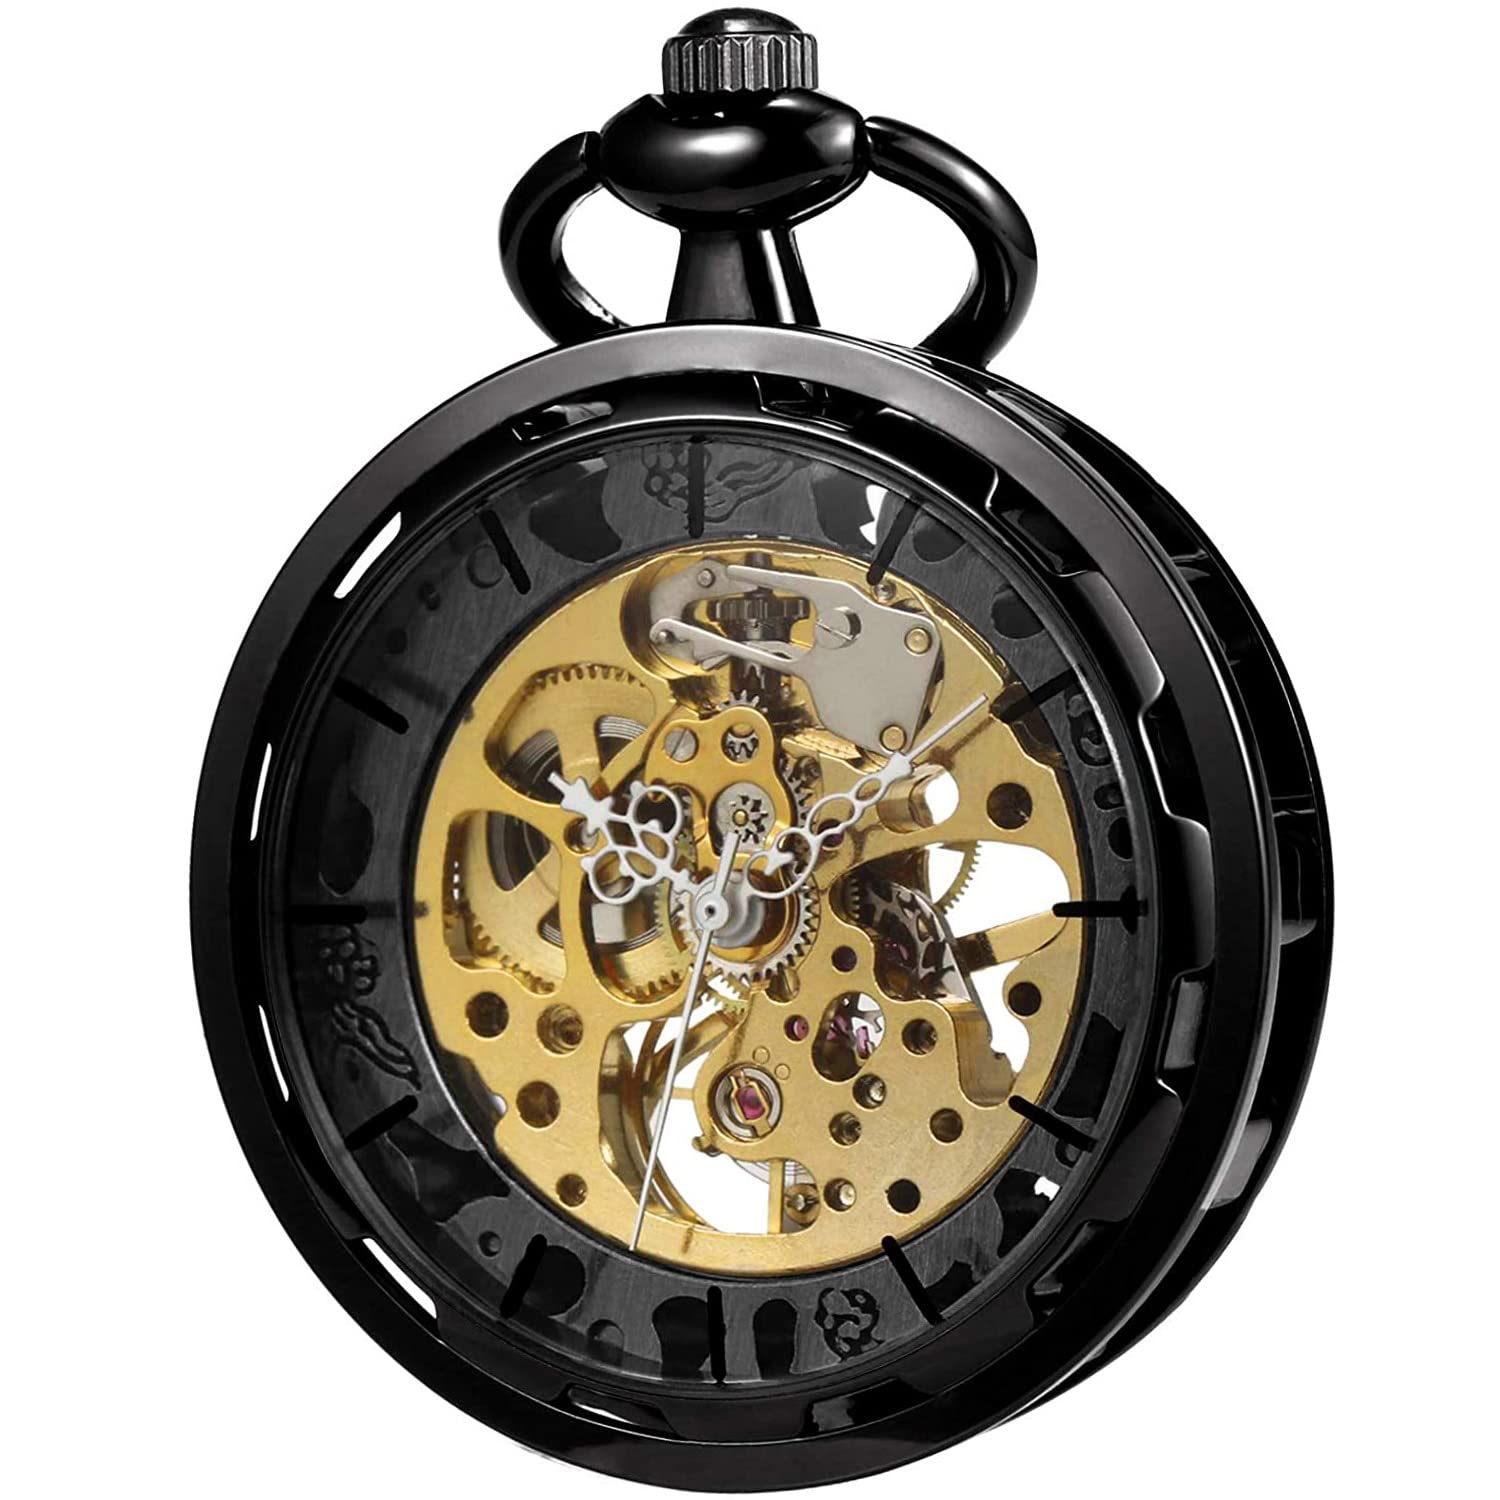 VIGOROSO Mens Classic Steampunk Pocket Watch Silver Skeleton Hand Wind Mechanical Watches in Box Mens Steampunk Pocket Watch with Chain Skeleton Manual Hand Wind Mechanical Watches for Men,